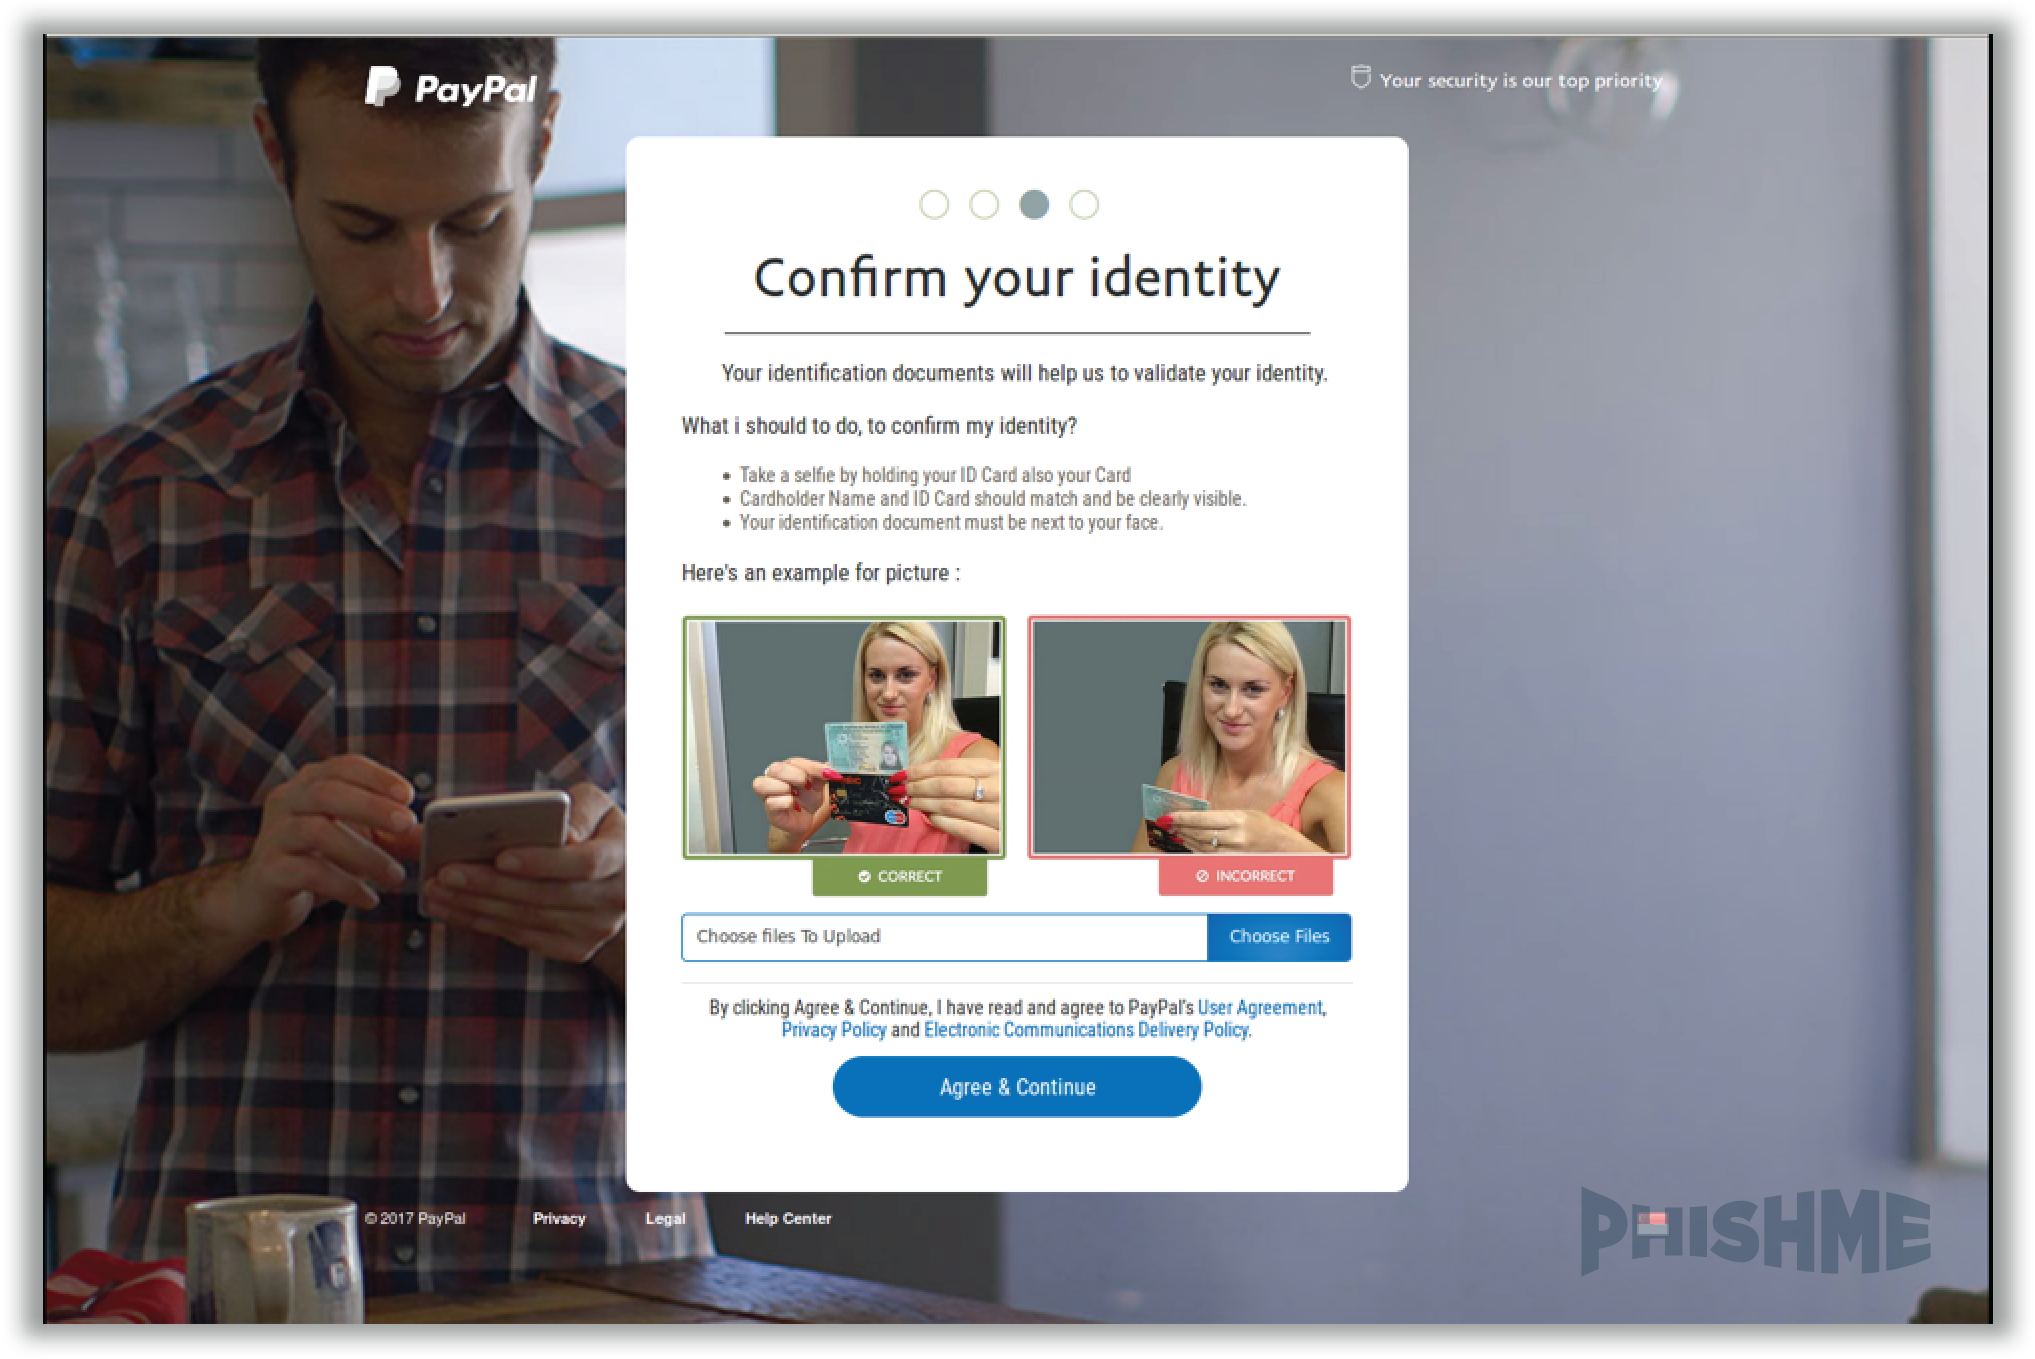 PayPalBranded Phishing Attack Demands Selfie With Photo ID